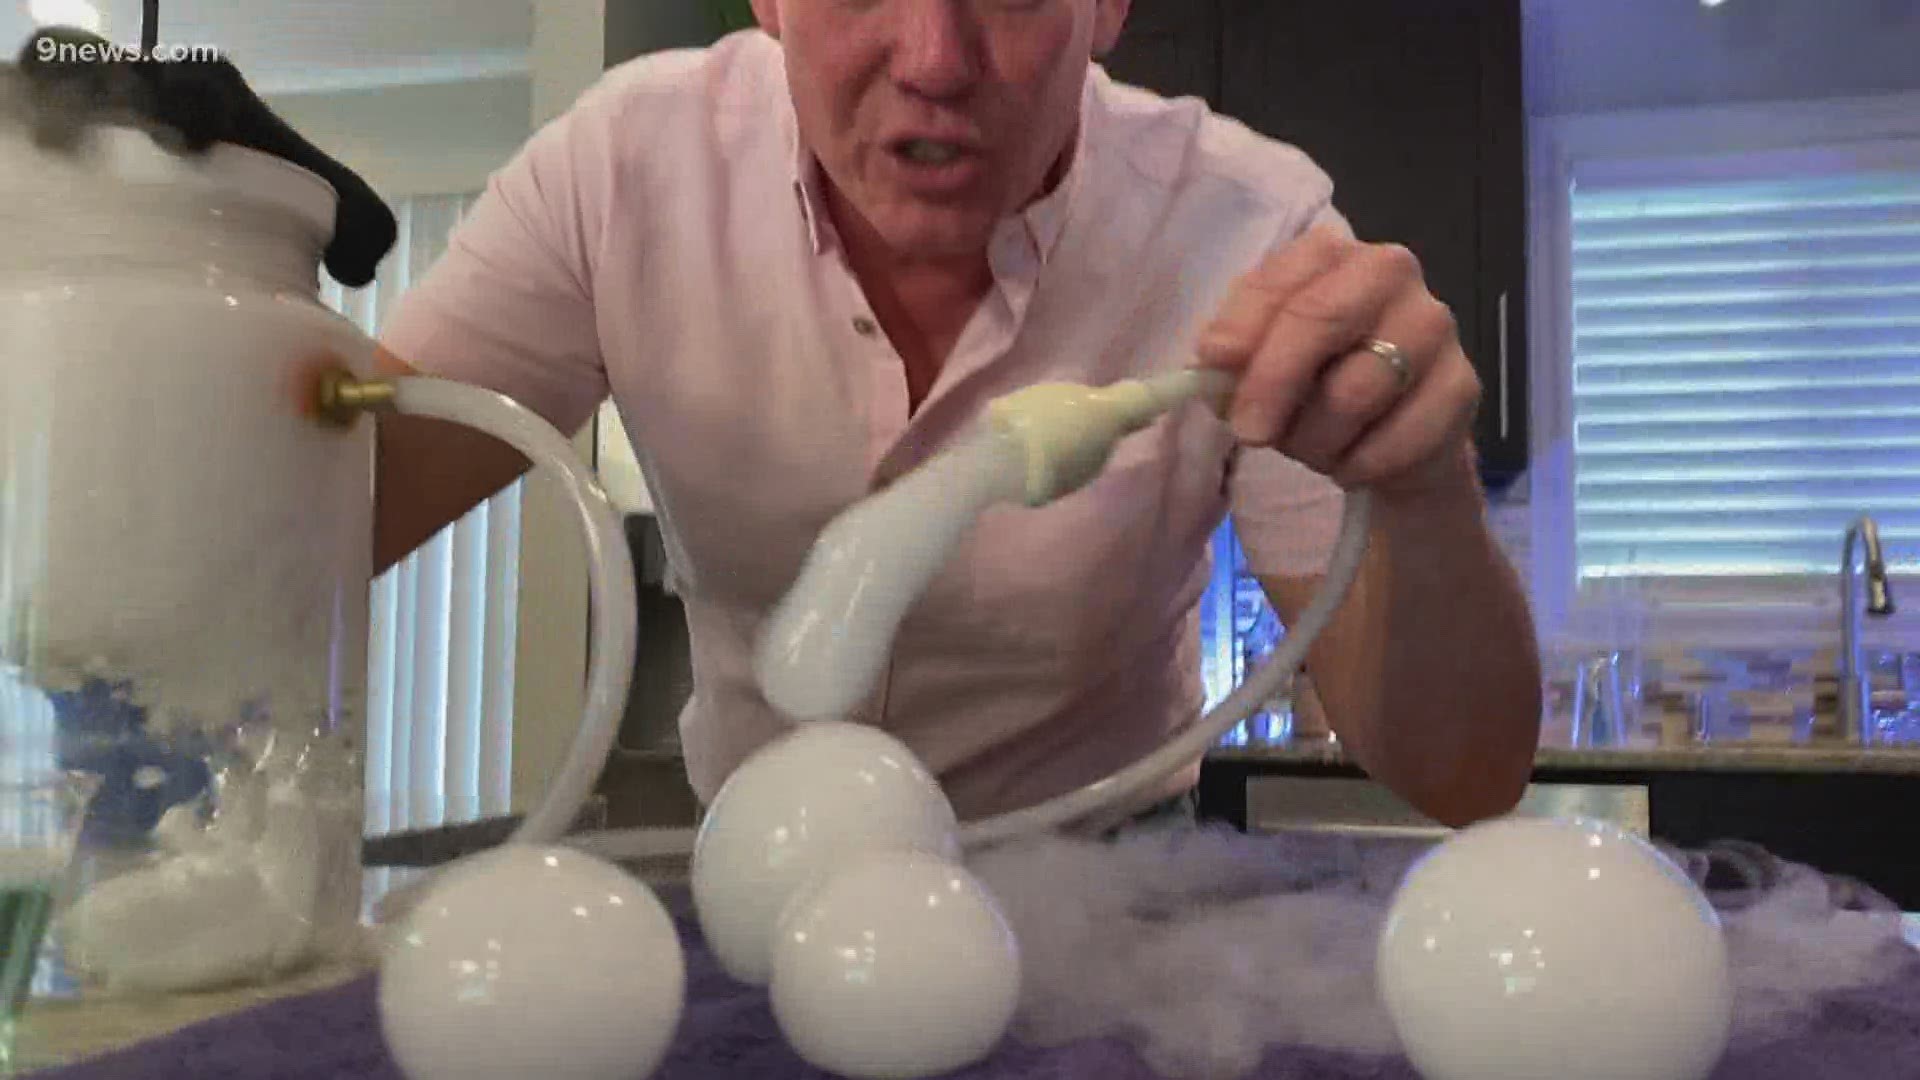 Dry ice isn't just for Halloween. Science guy Steve Spangler shows how frozen carbon dioxide can be a year-round staple.